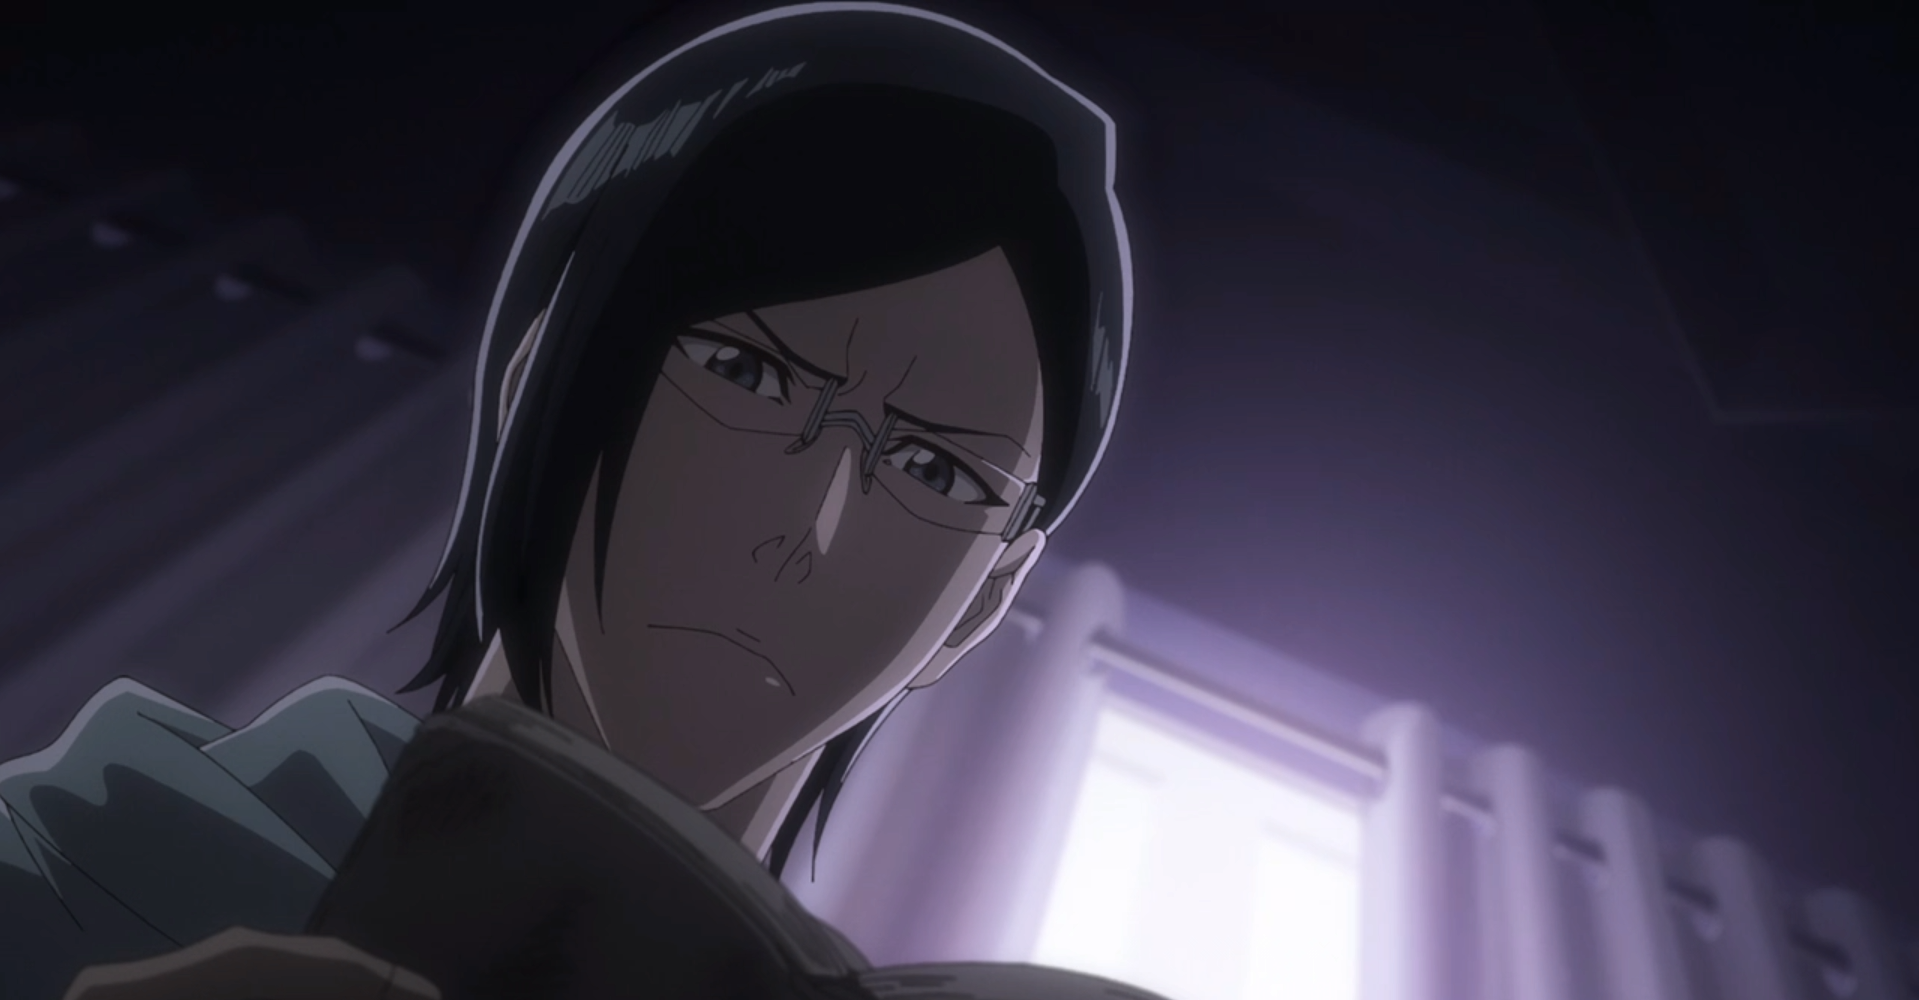 Uryu looks downward at a journal from his father's desk